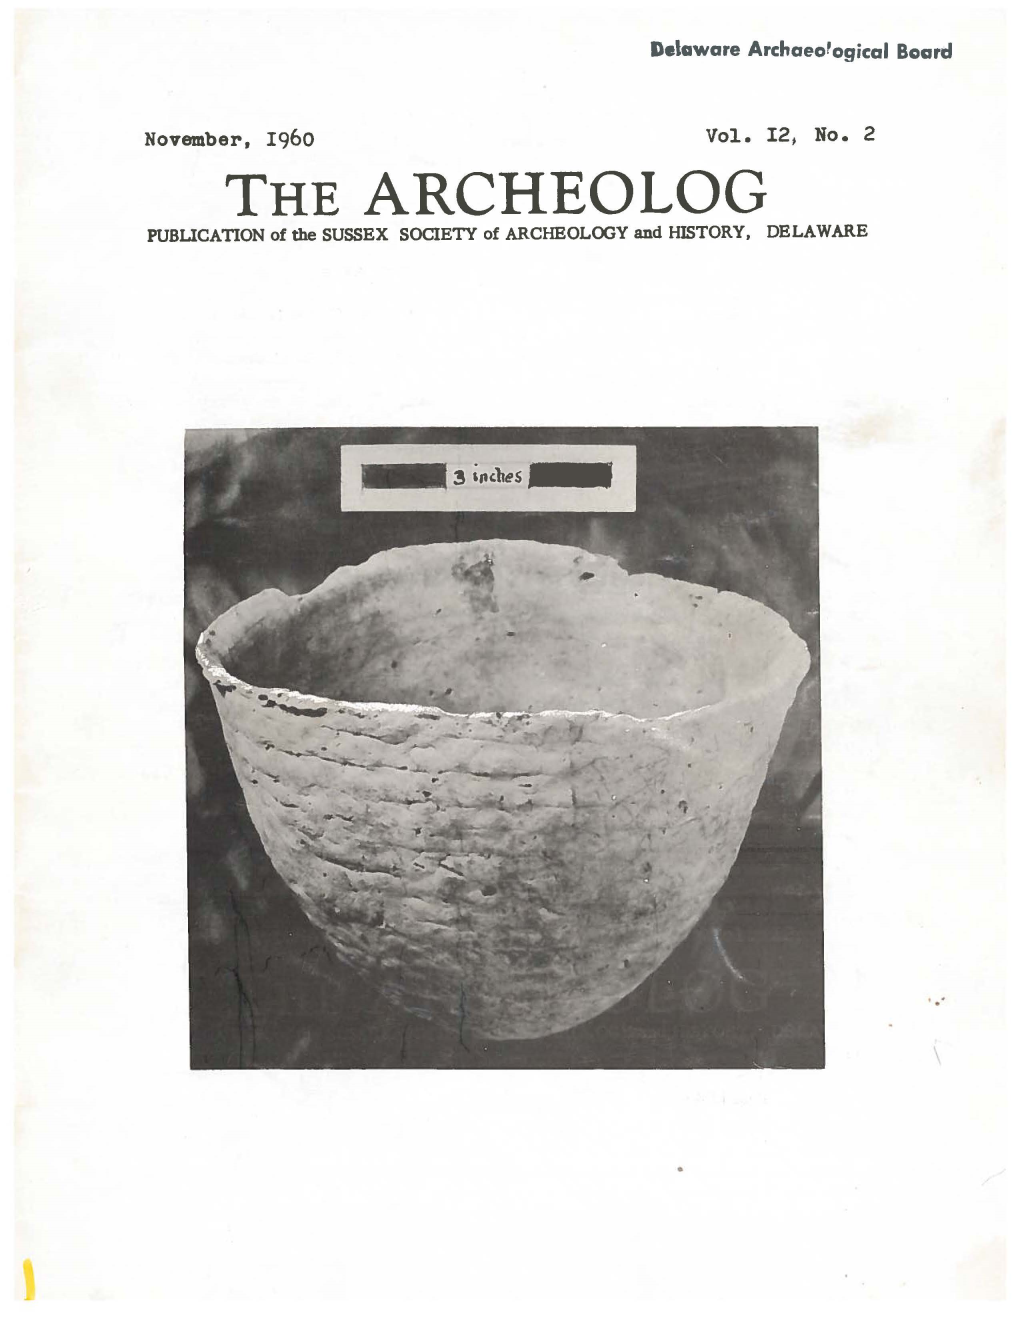 THE ARCHEOLOG PUBLICATION of the SUSSEX SOCIETY of ARCHEOLOGY and HISTORY, DELAWARE